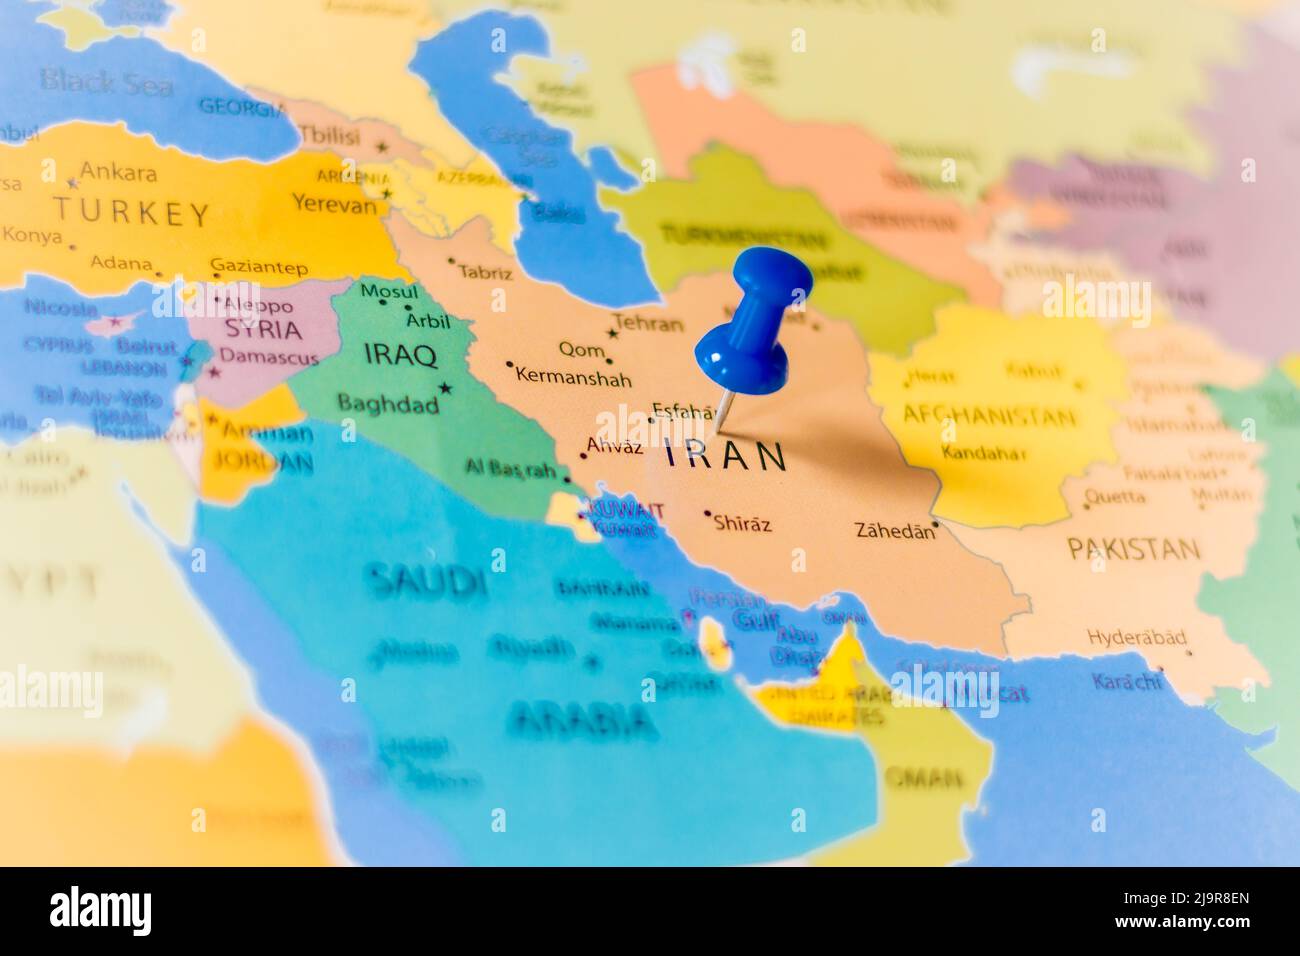 Blue push pin pointing at Iran on a political world map Stock Photo